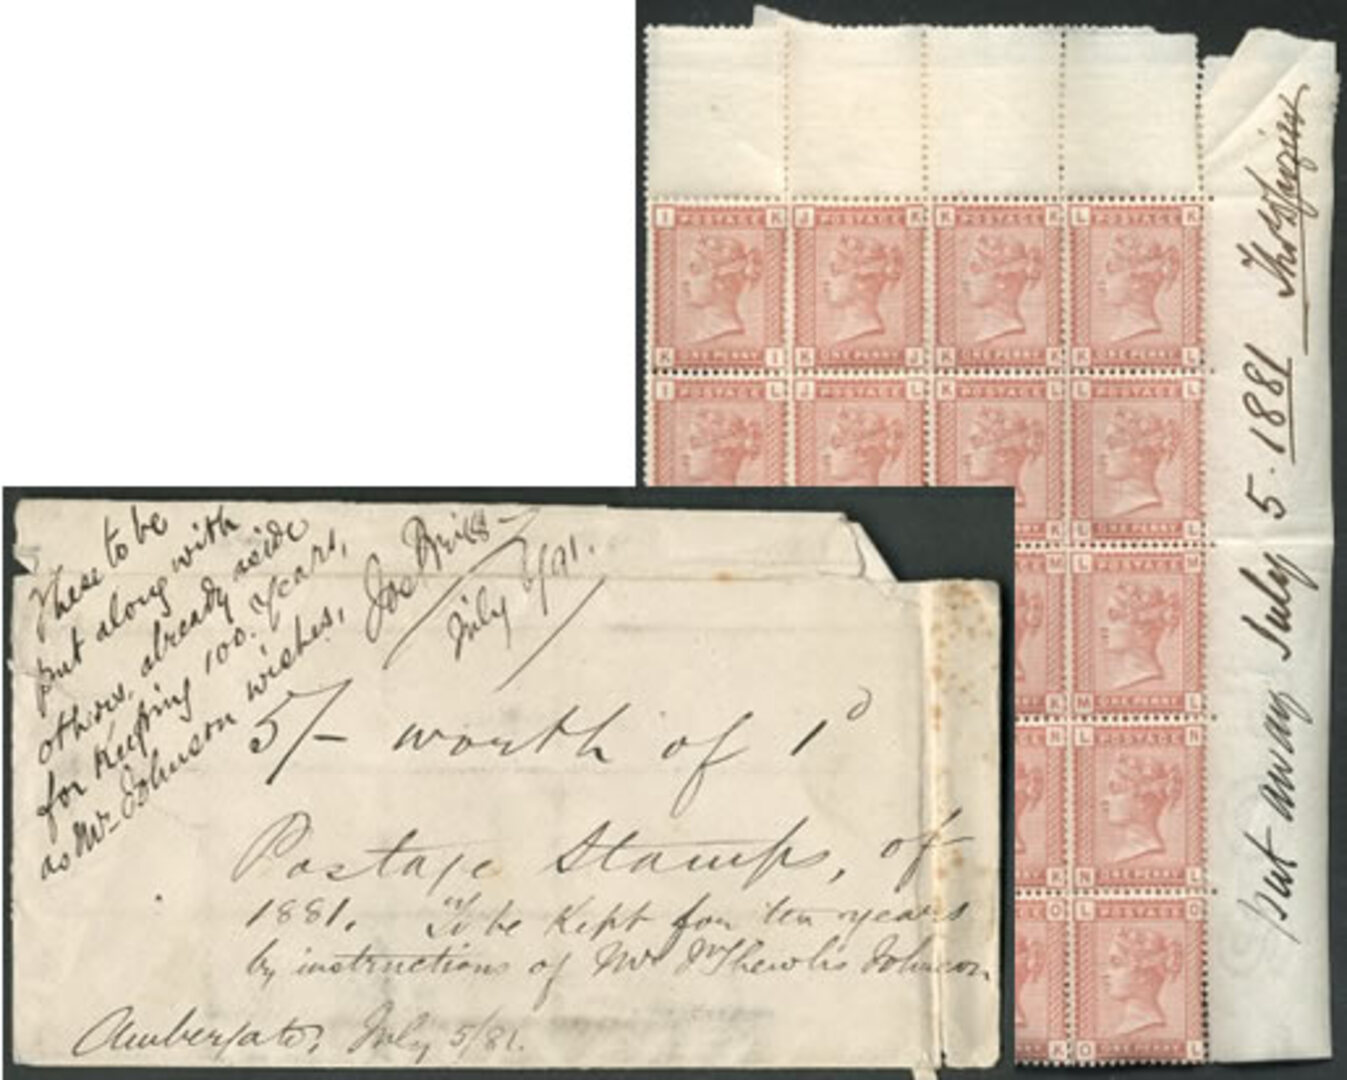 Earliest example of postage stamp investment Sandafayre has ever come across